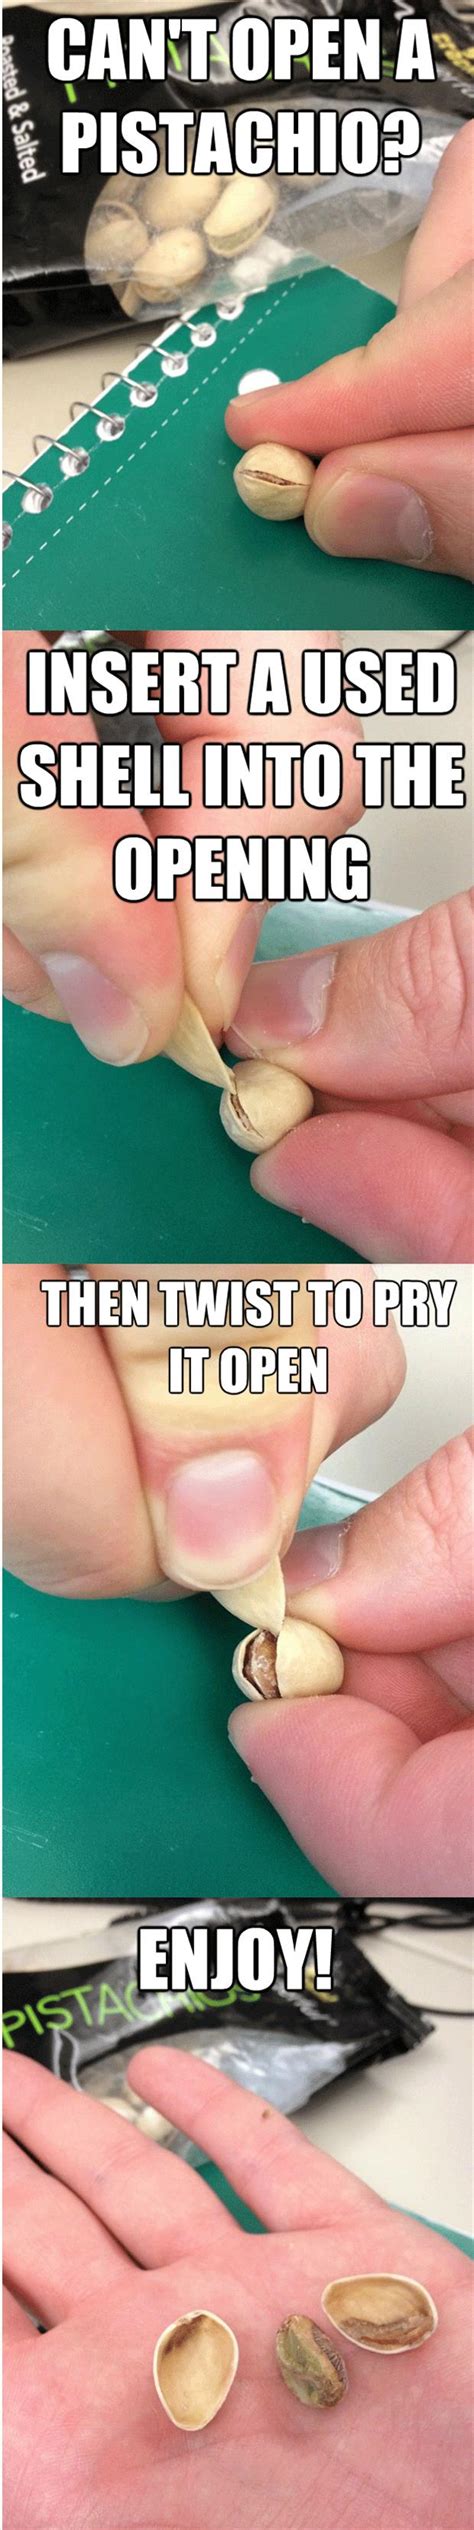 15 quick and easy life hacks to make your life much easier